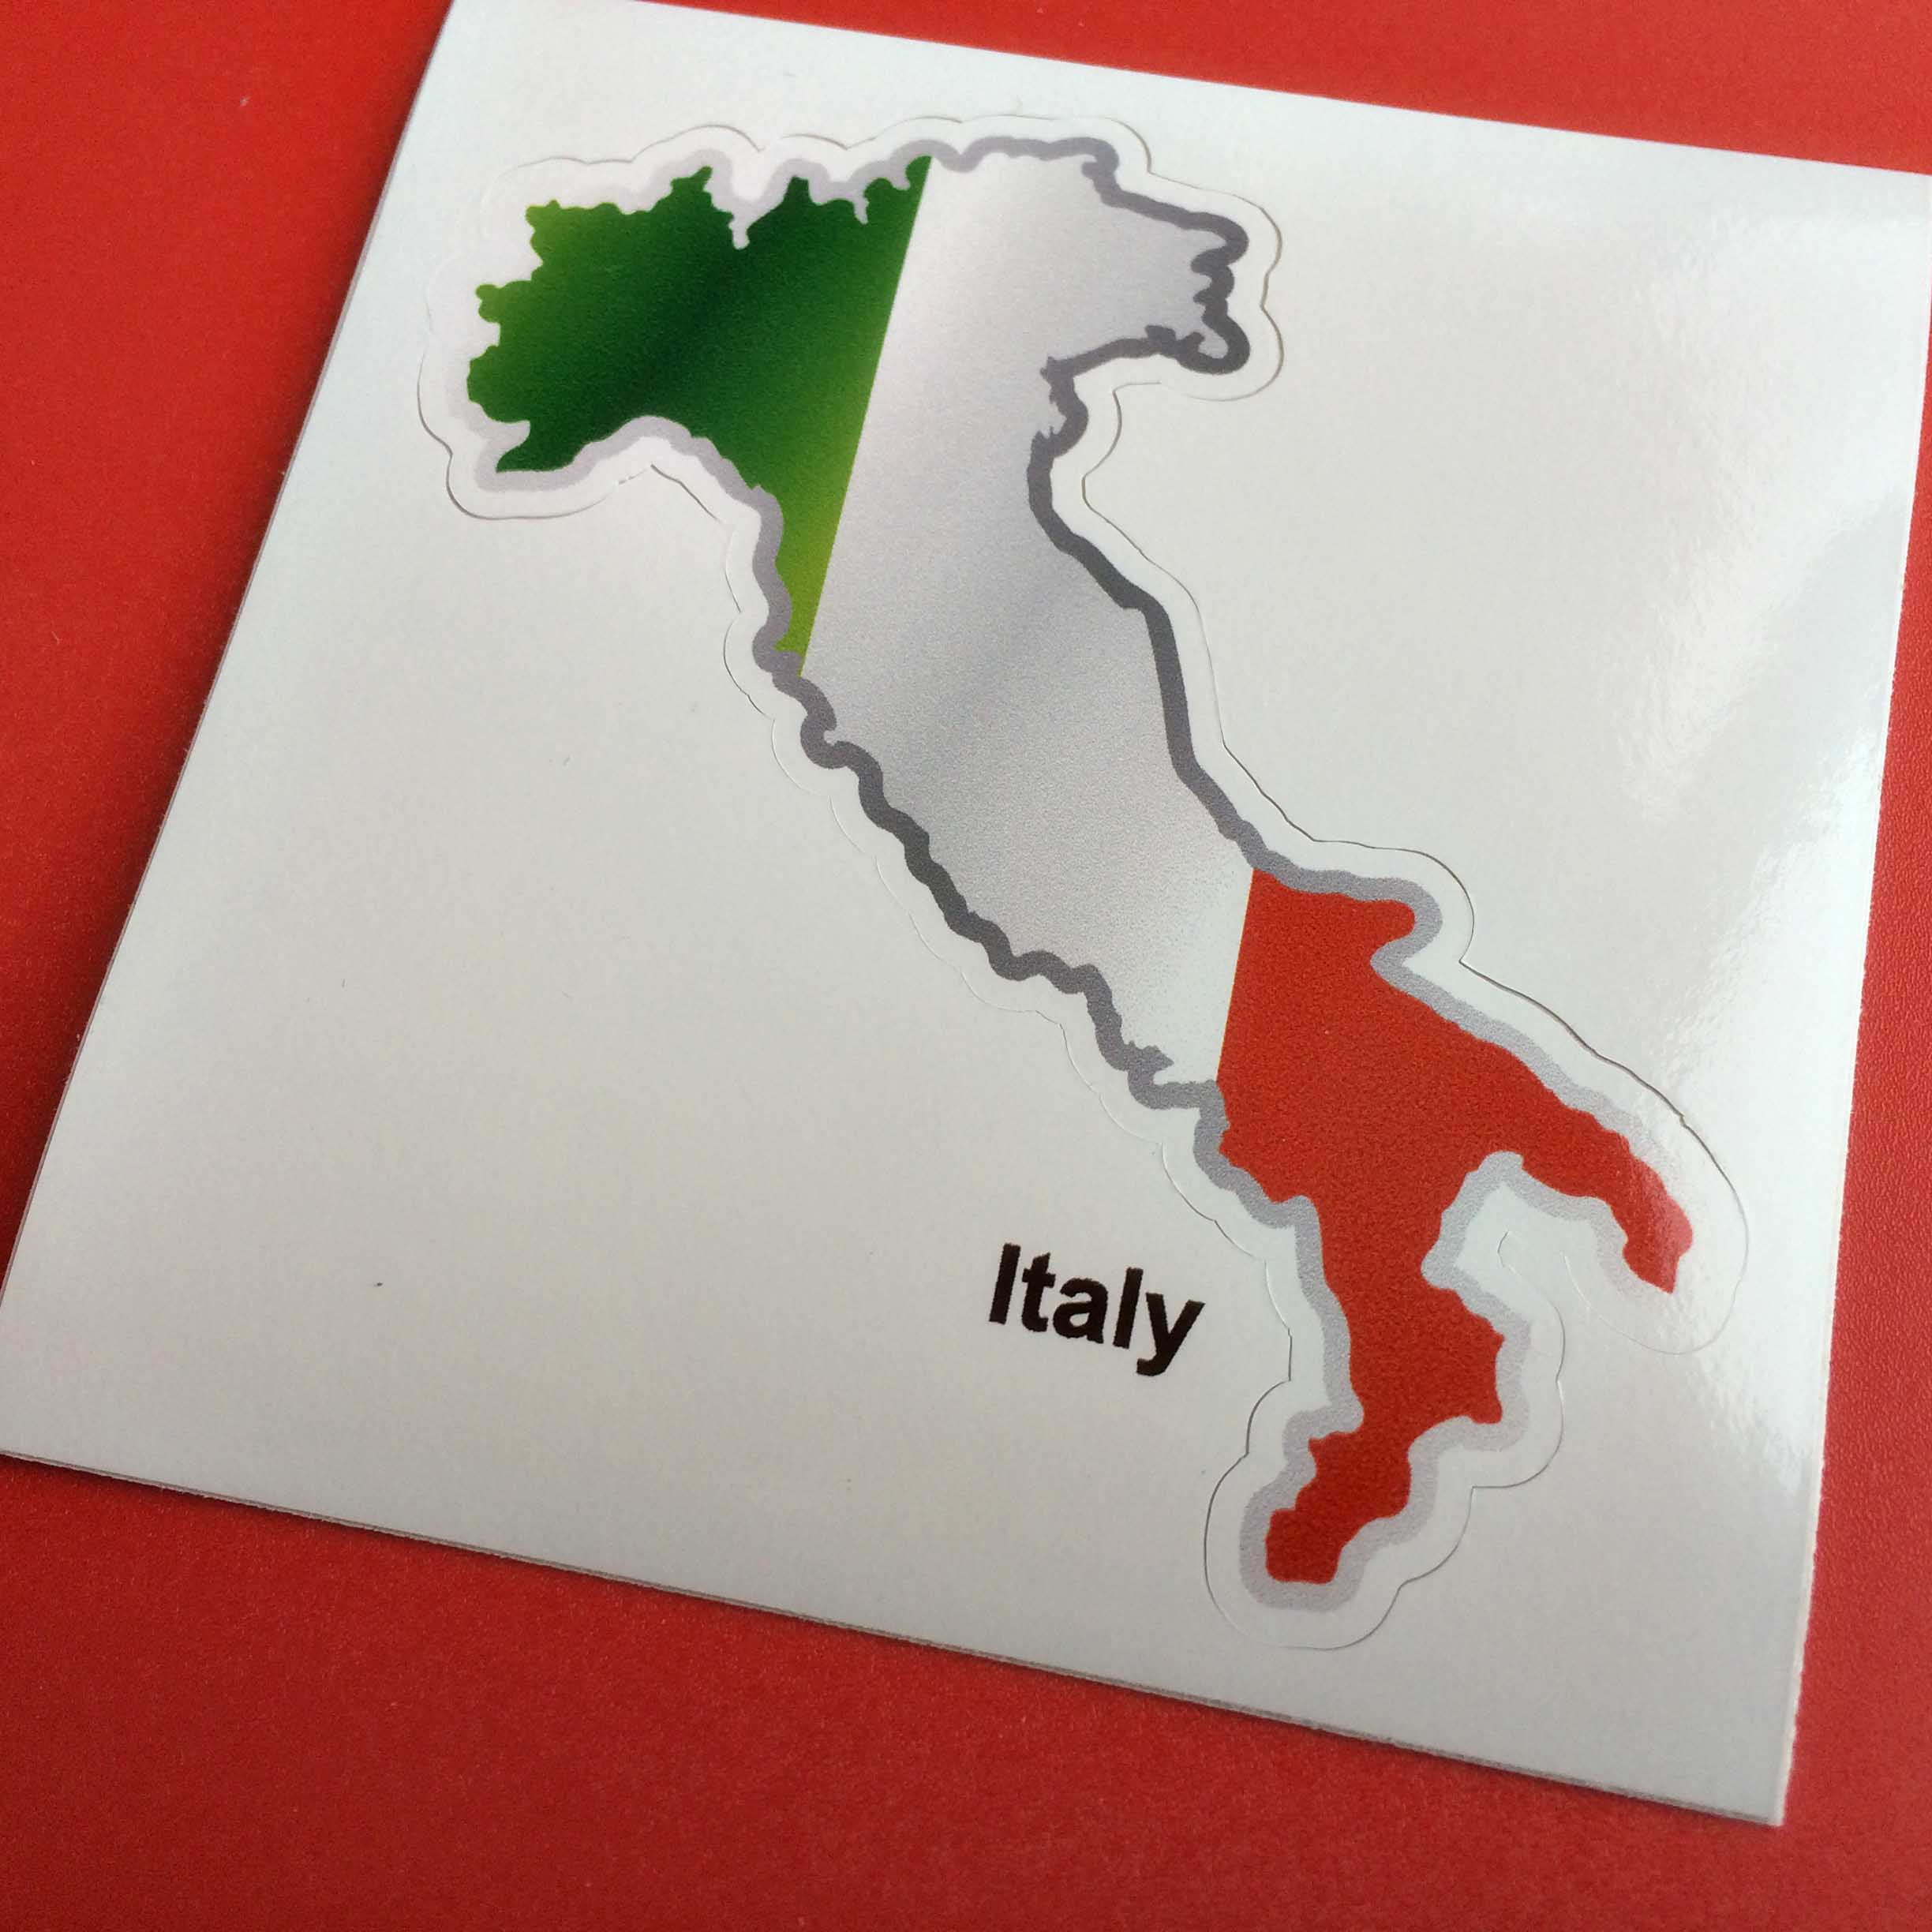 The green, white and red flag and map of Italy.